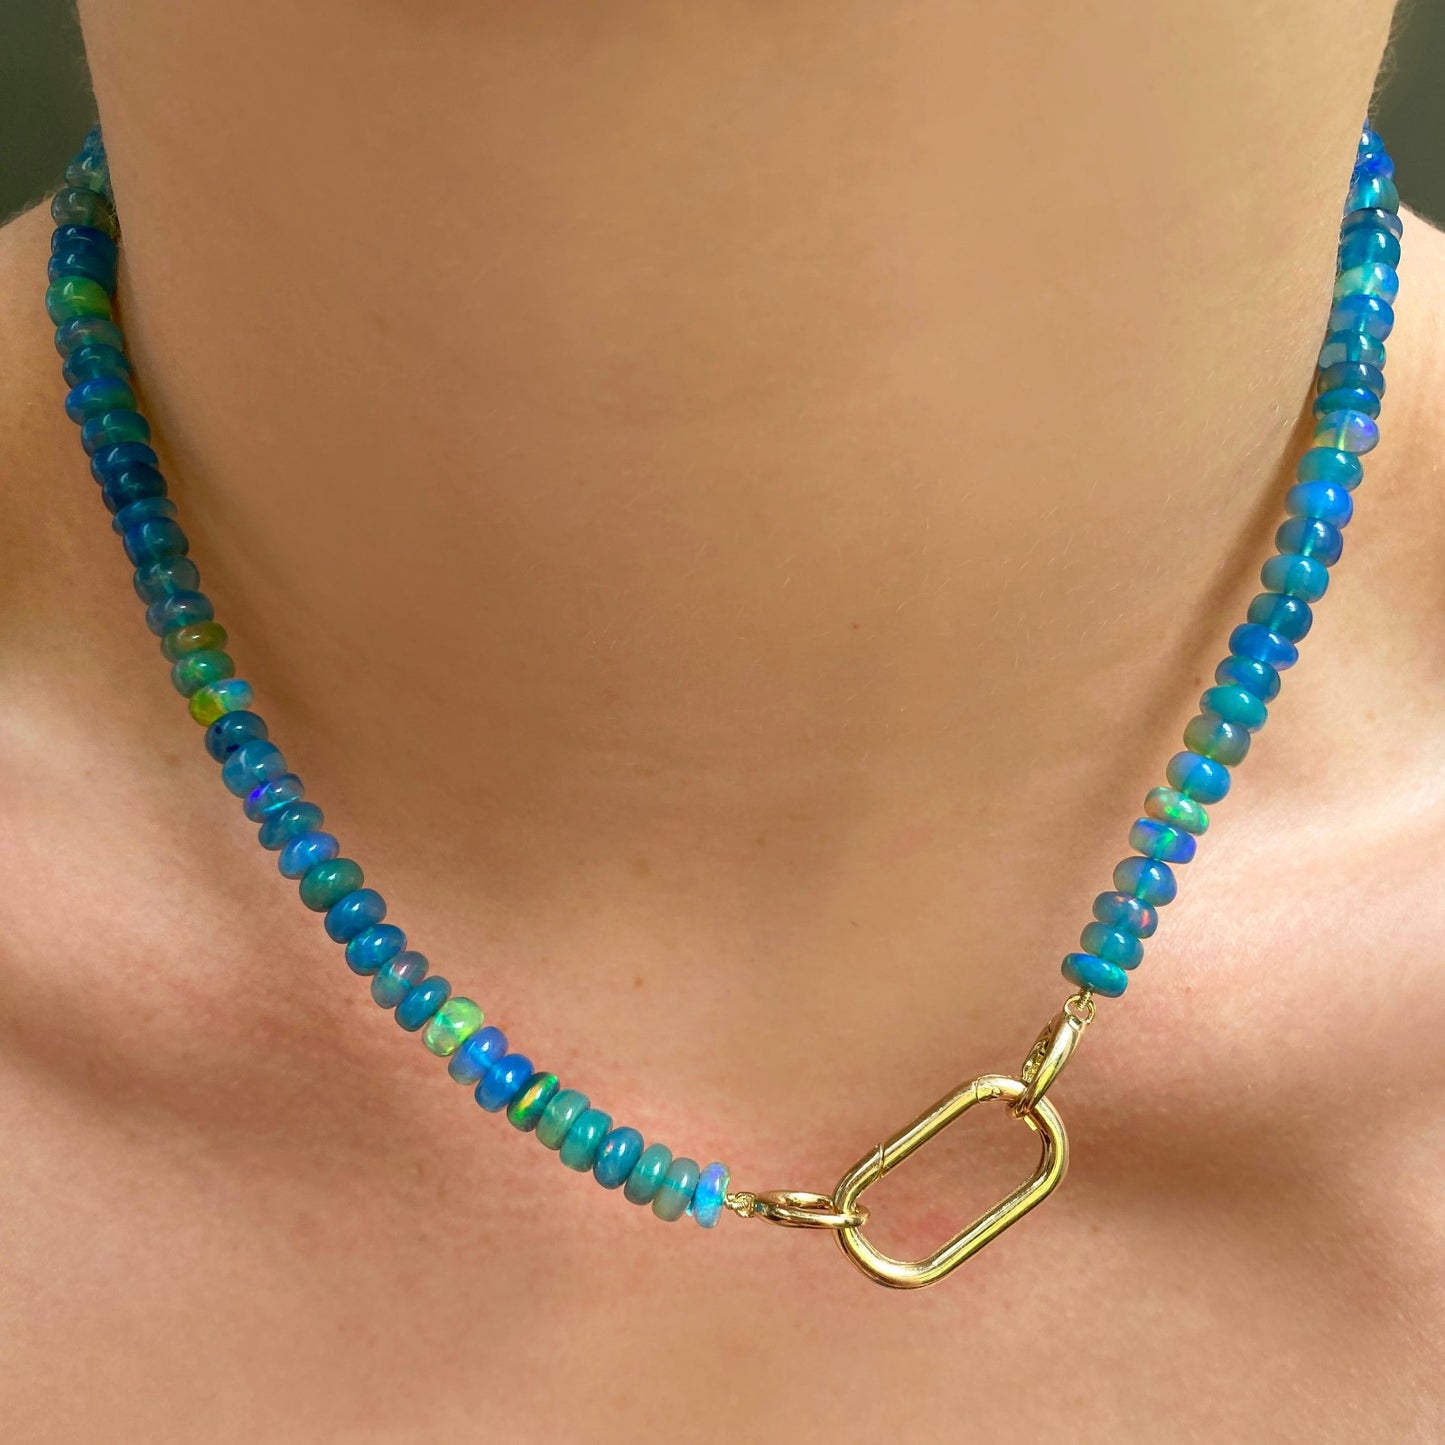 Shimmering beaded necklace made of smooth opal rondels in shades of blue, teal, and green on a slim gold oval clasp. Styled on a neck layered with plain oval charm lock.